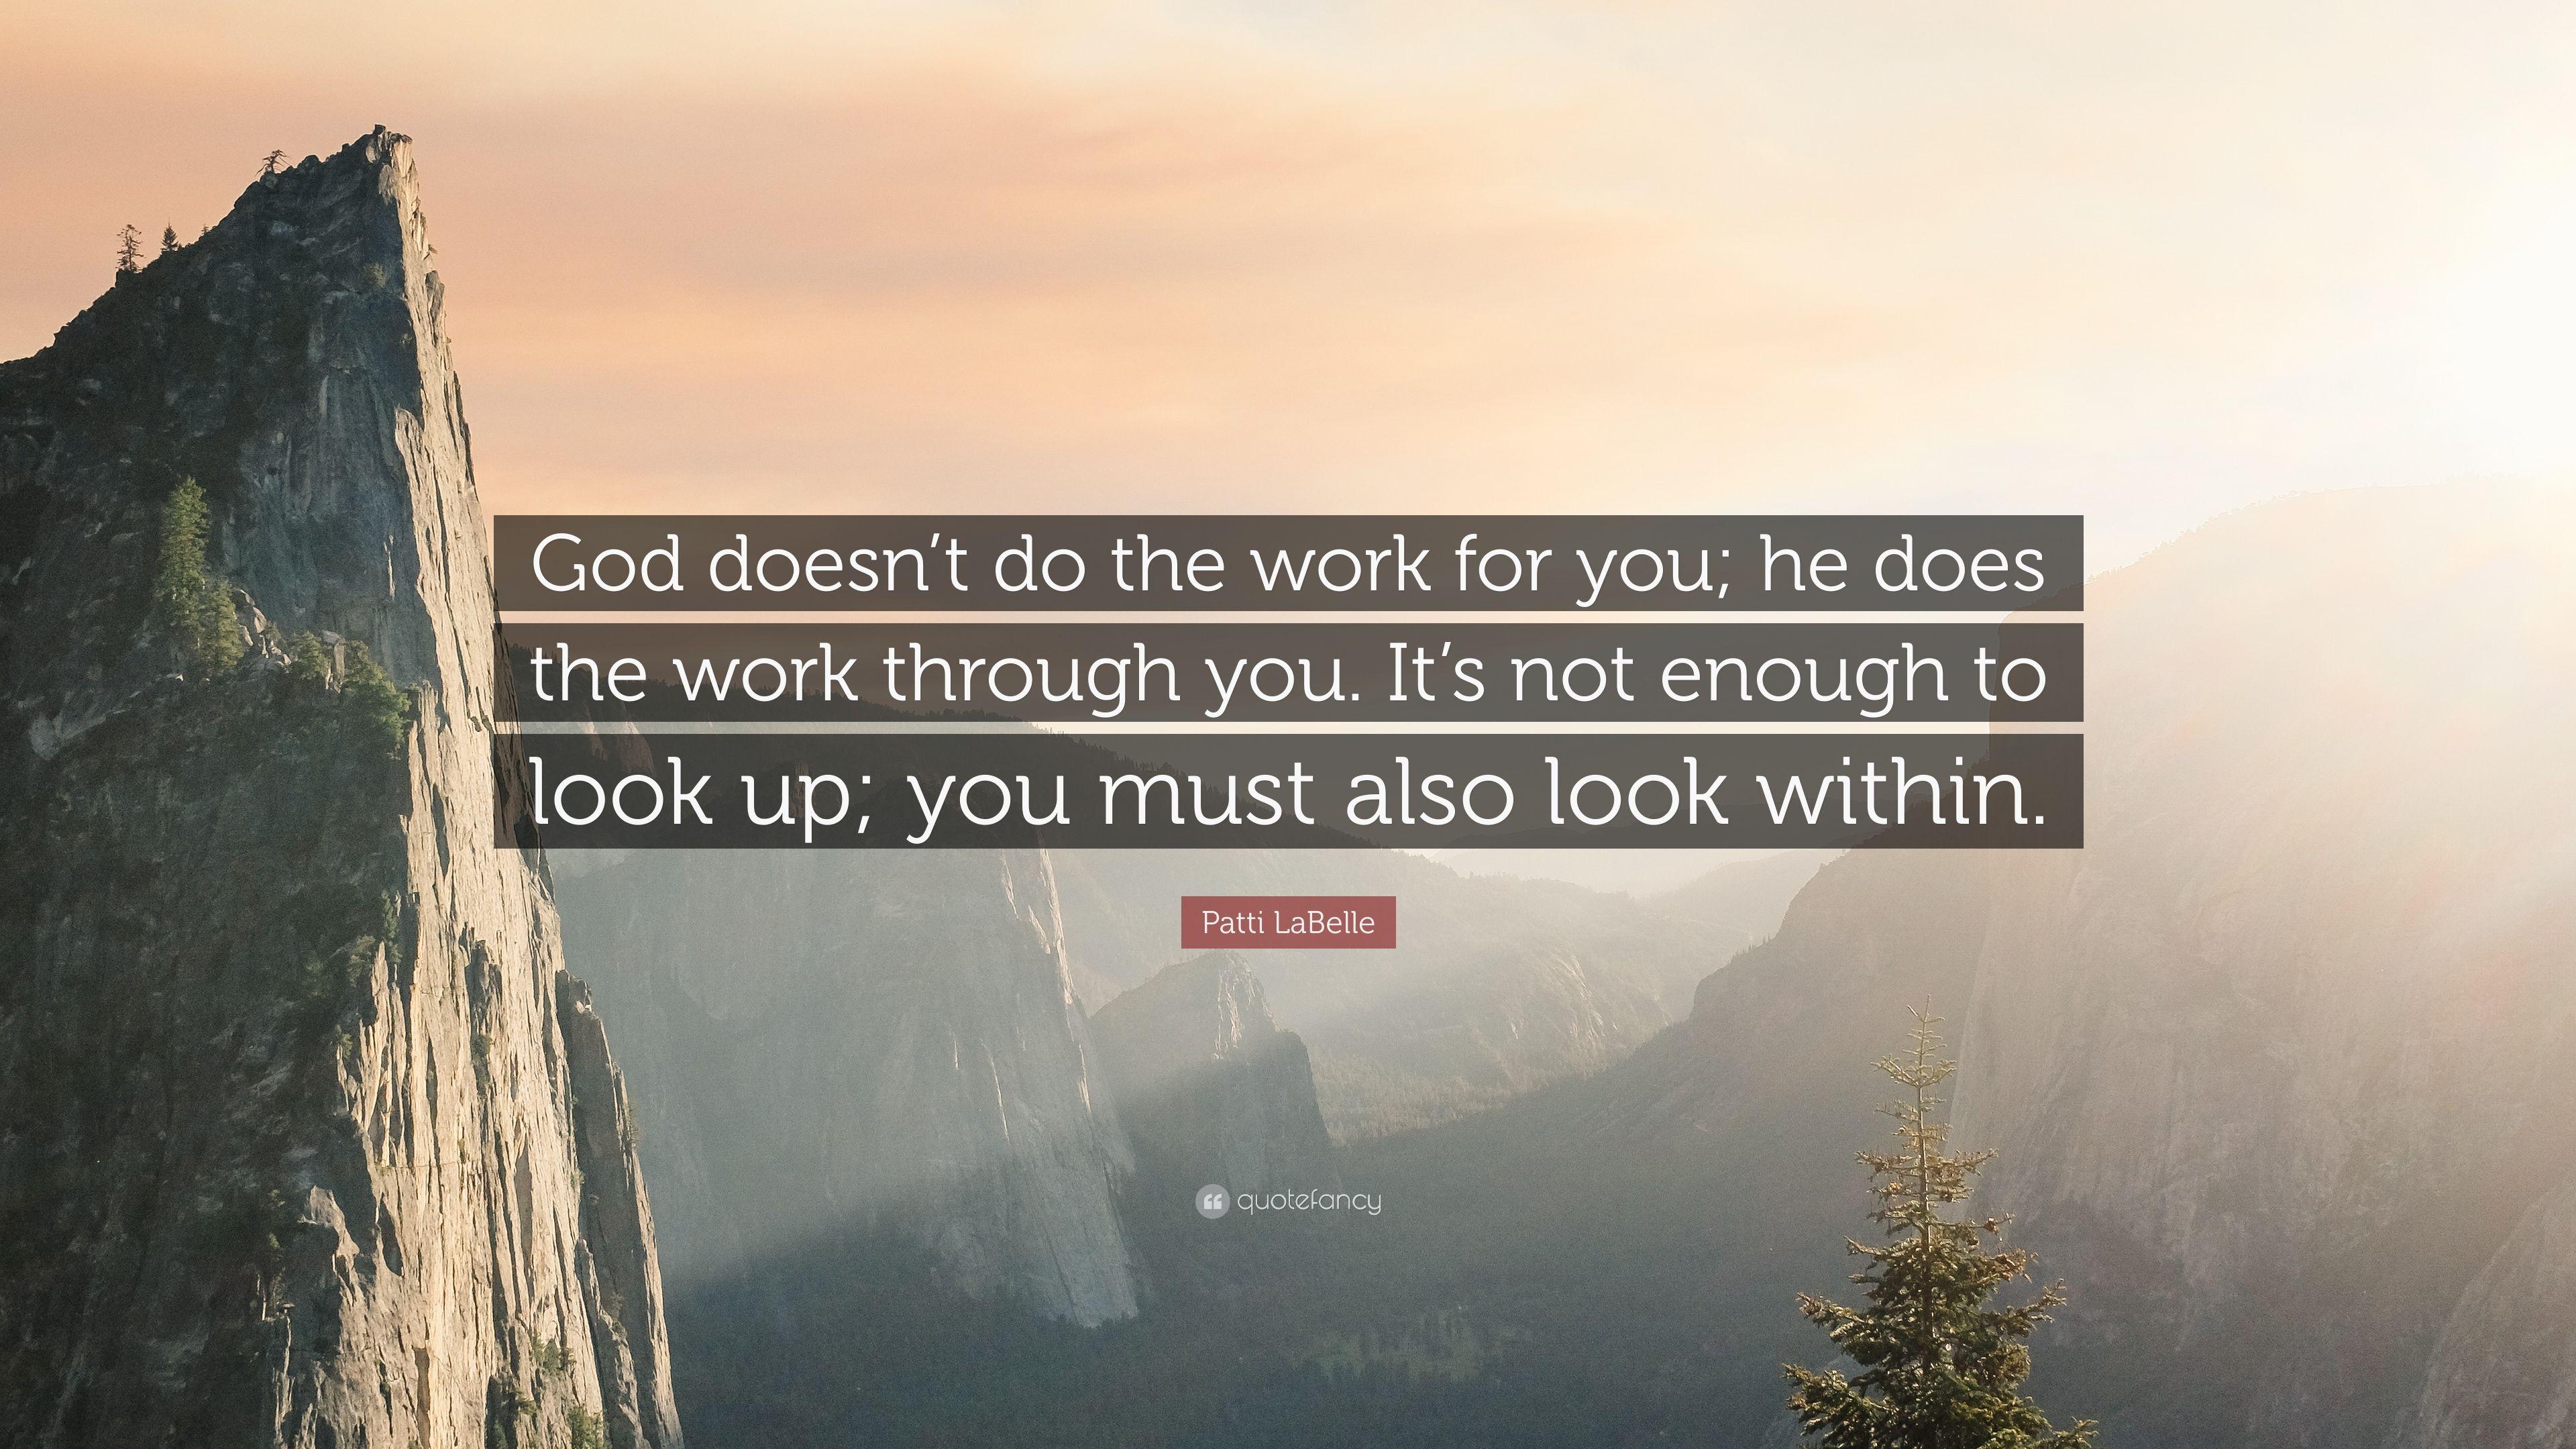 Patti LaBelle Quote: “God doesn't do the work for you; he does